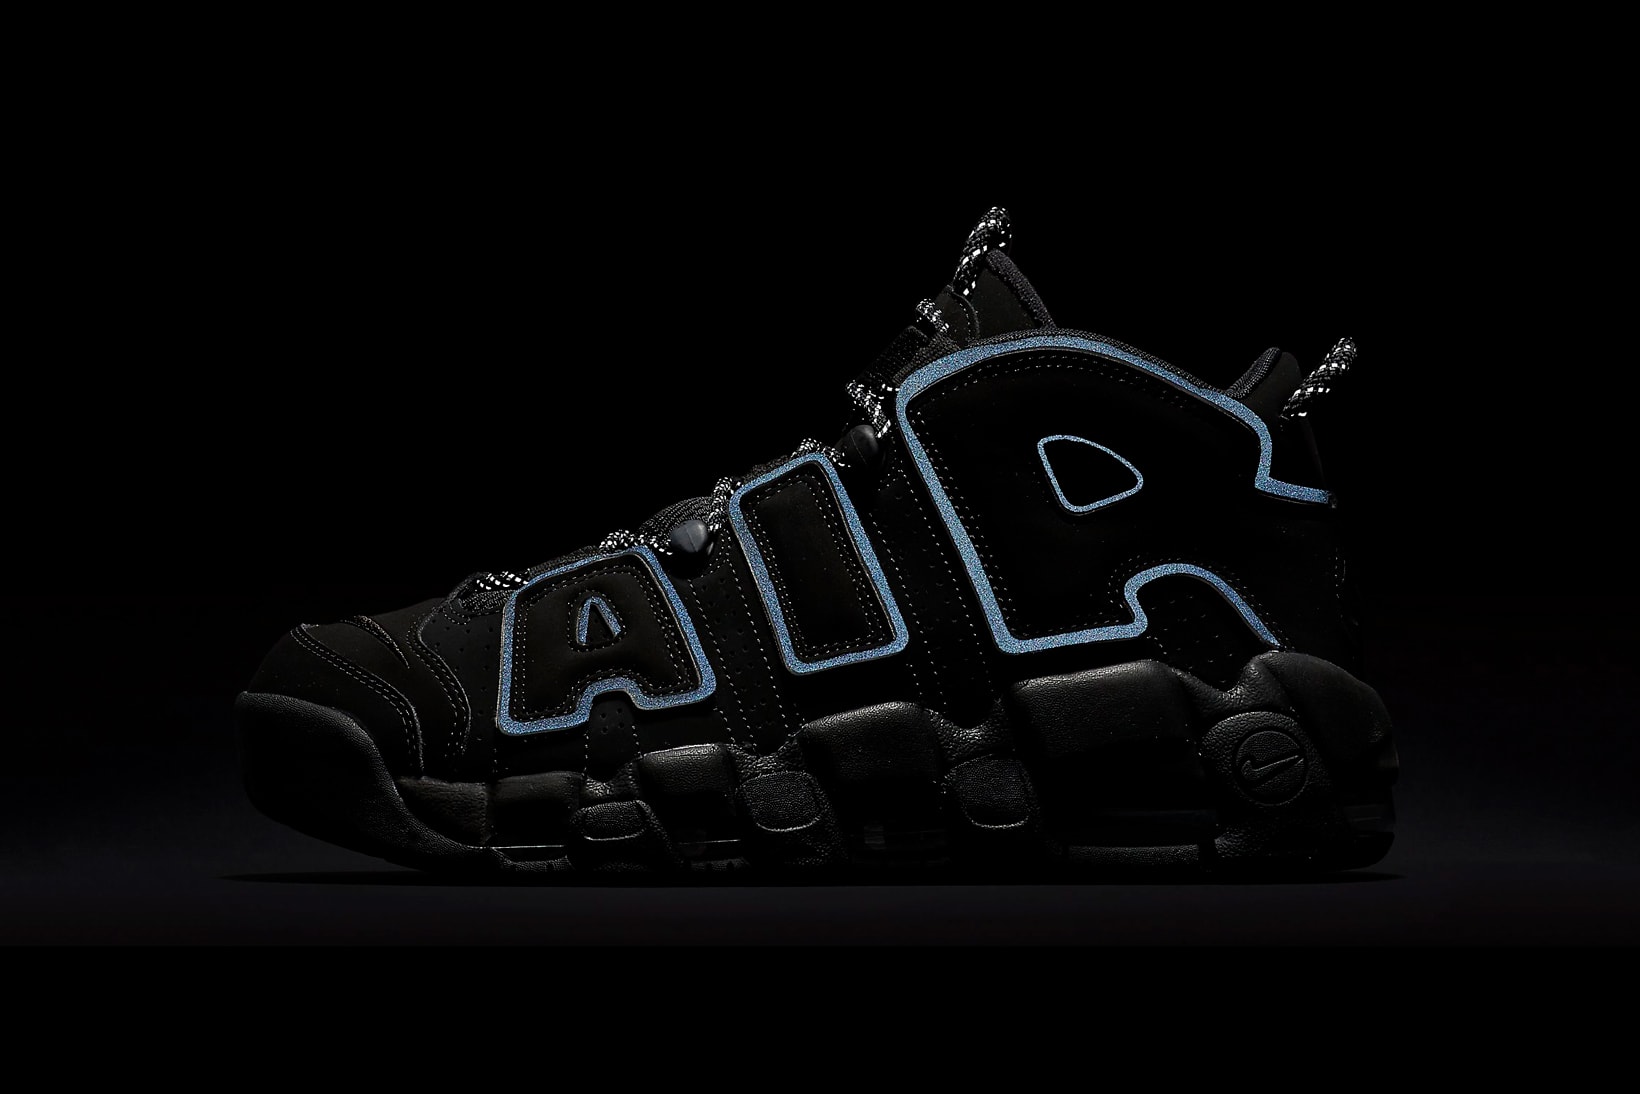 Nike Air More Uptempo Remains a Cash Cow Years Later